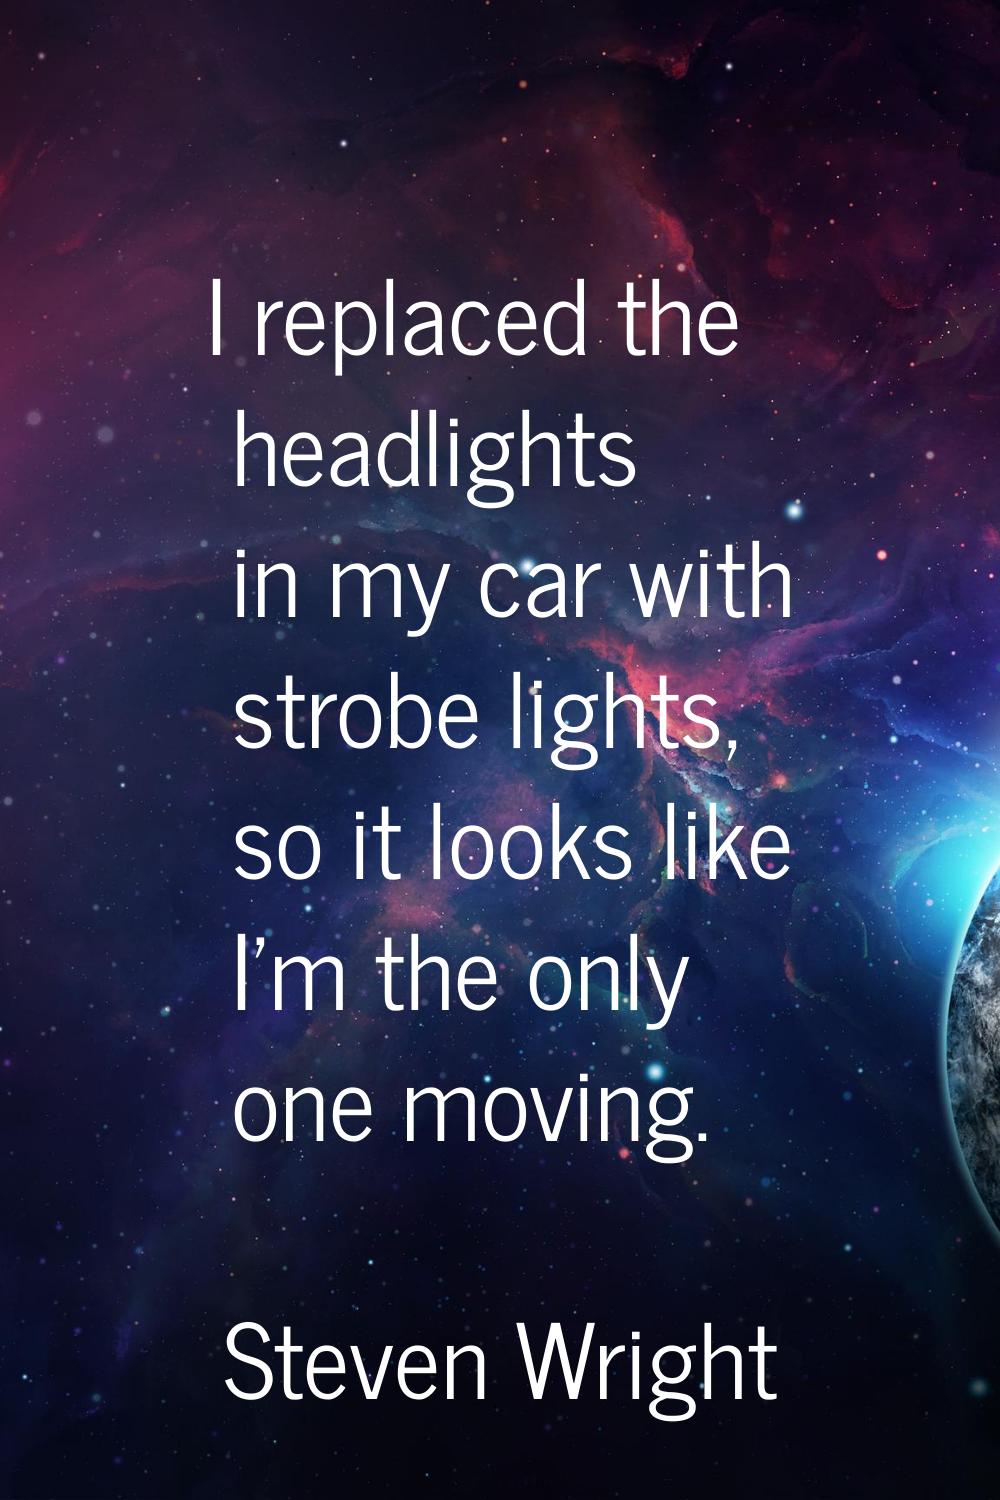 I replaced the headlights in my car with strobe lights, so it looks like I'm the only one moving.